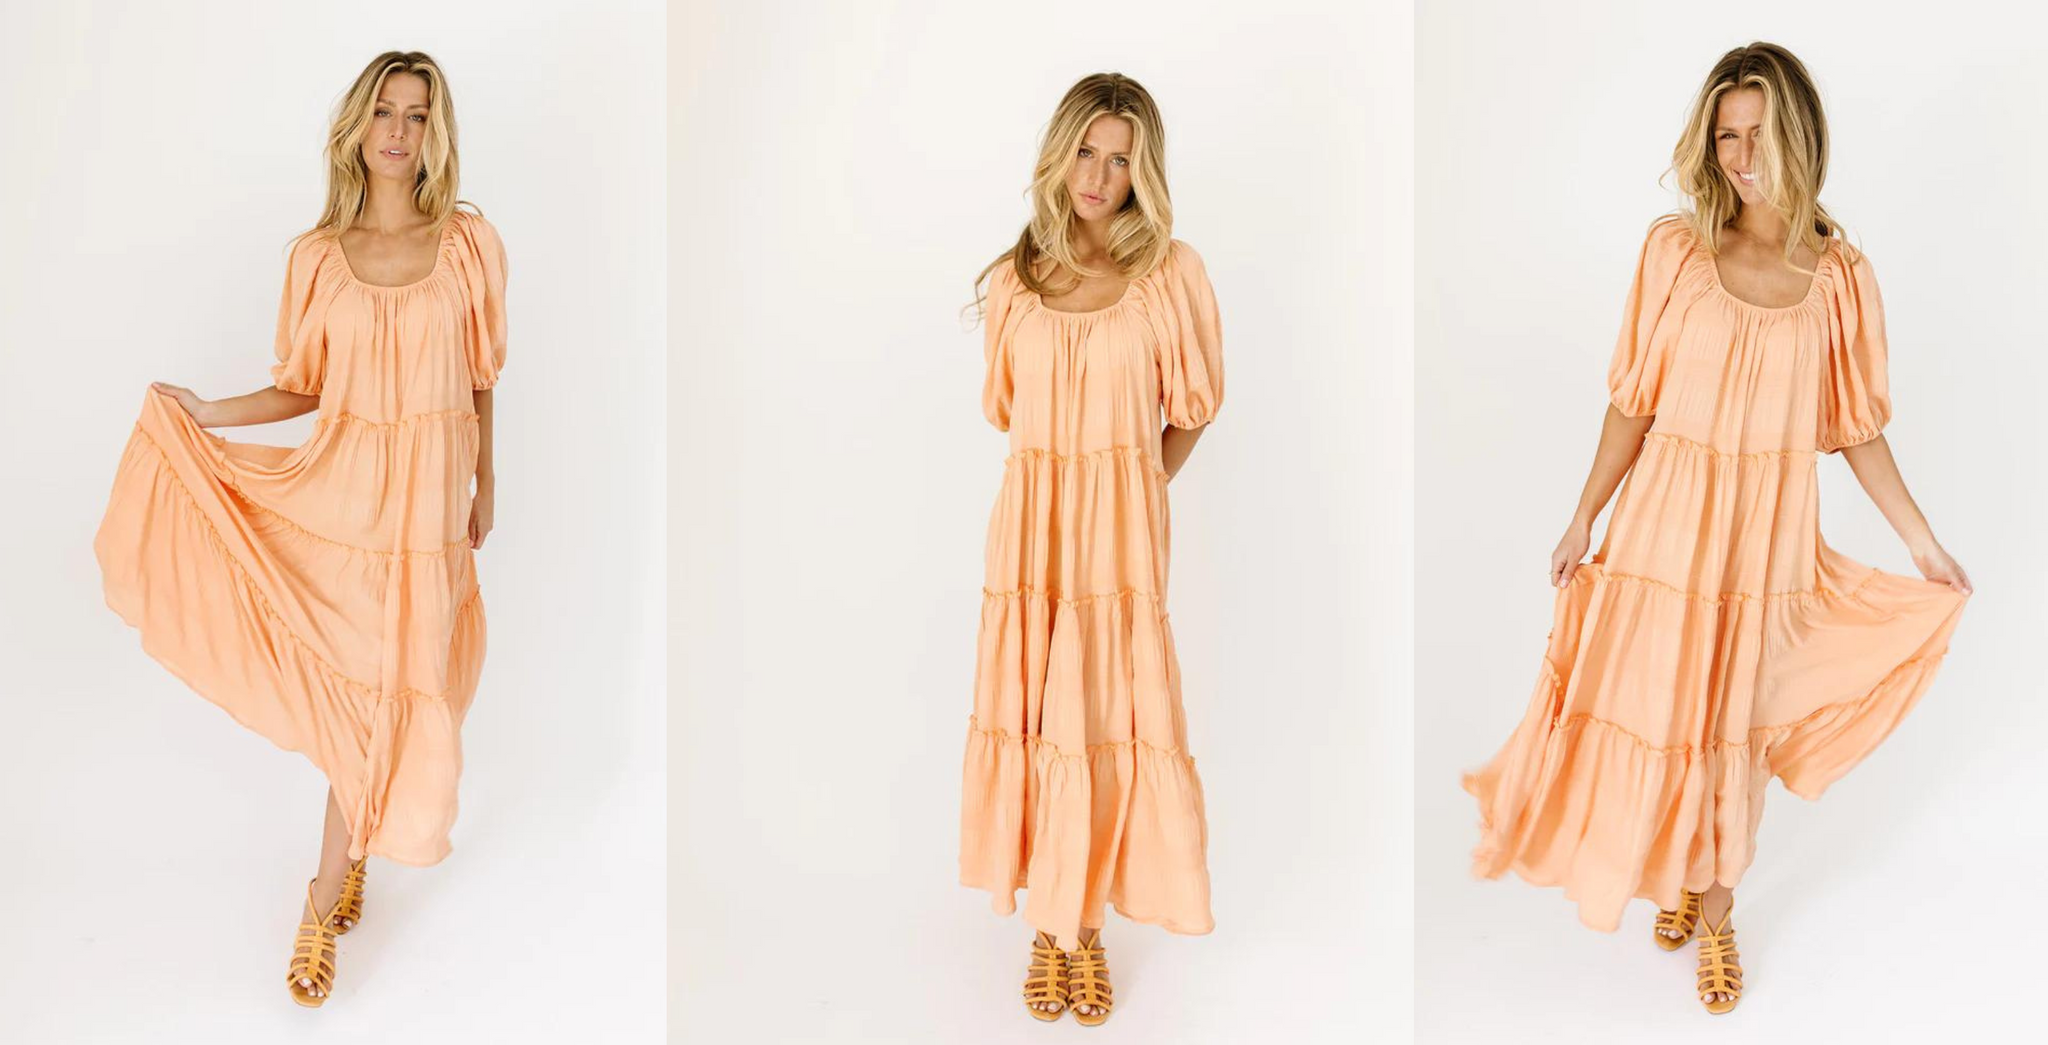 Peach maxi dress outfit idea for a formal occasion. 